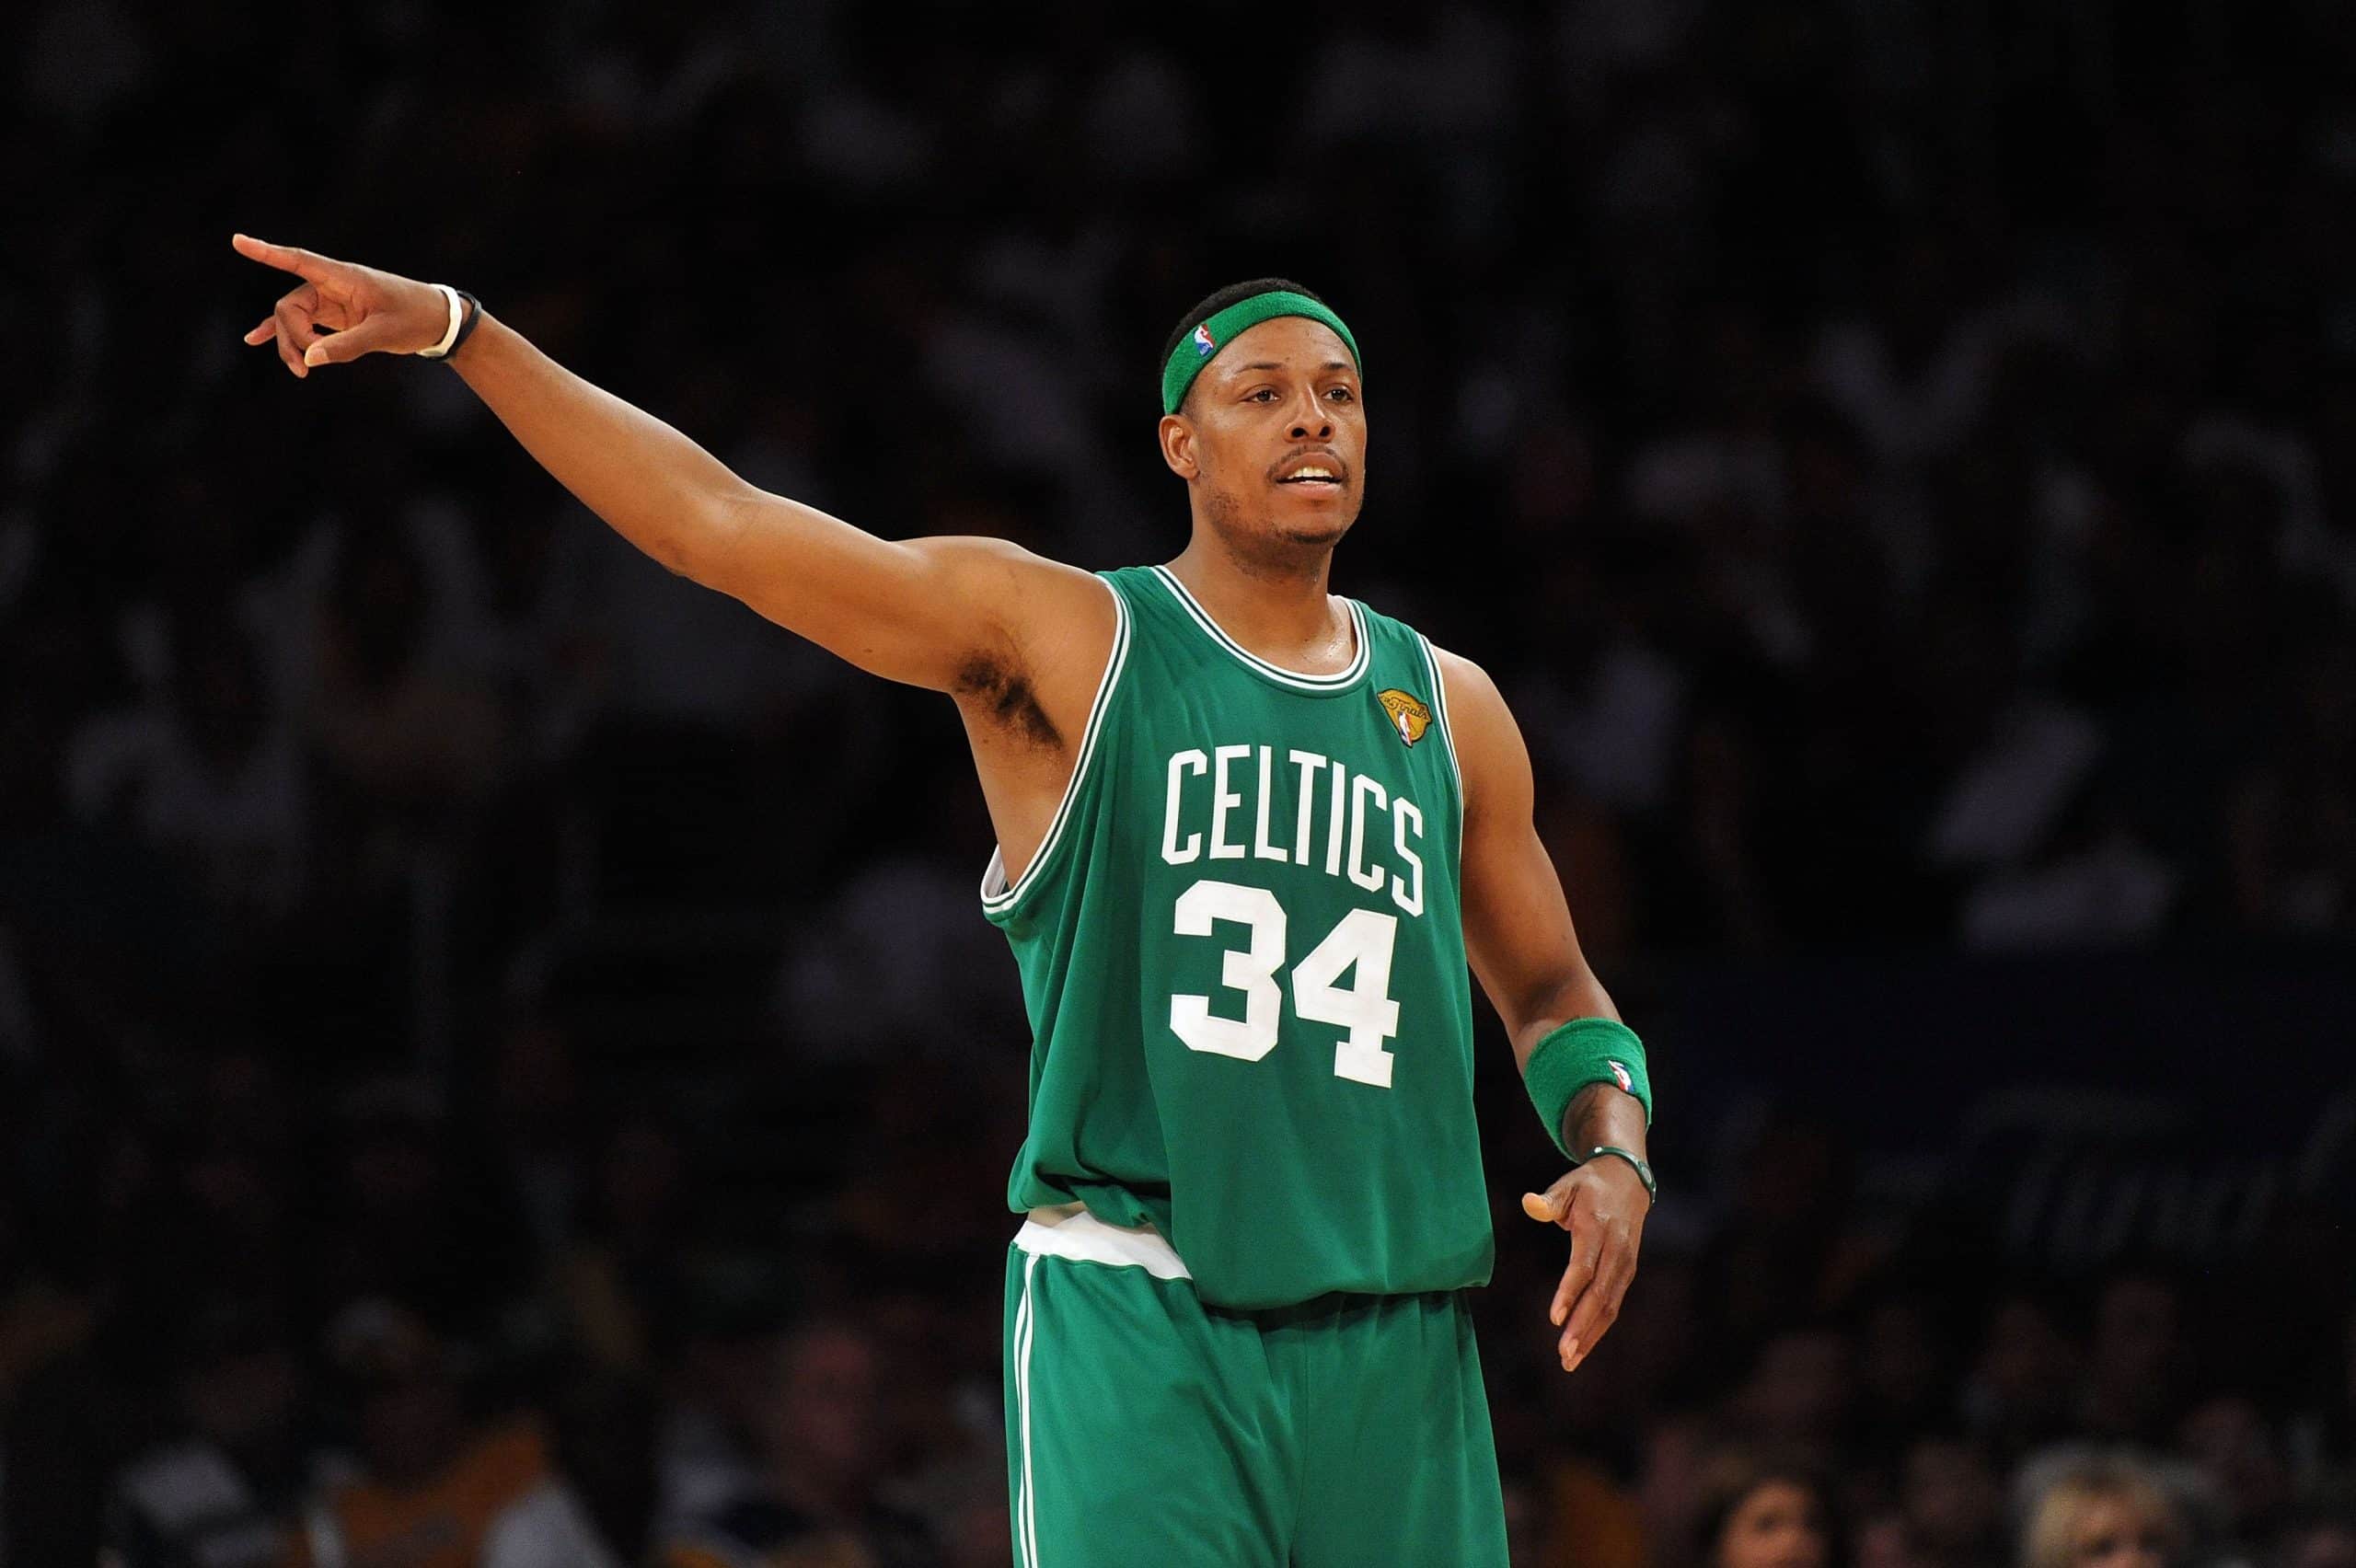 Paul Pierce of the Boston Celtics gestures on court against the Los Angeles Lakers.